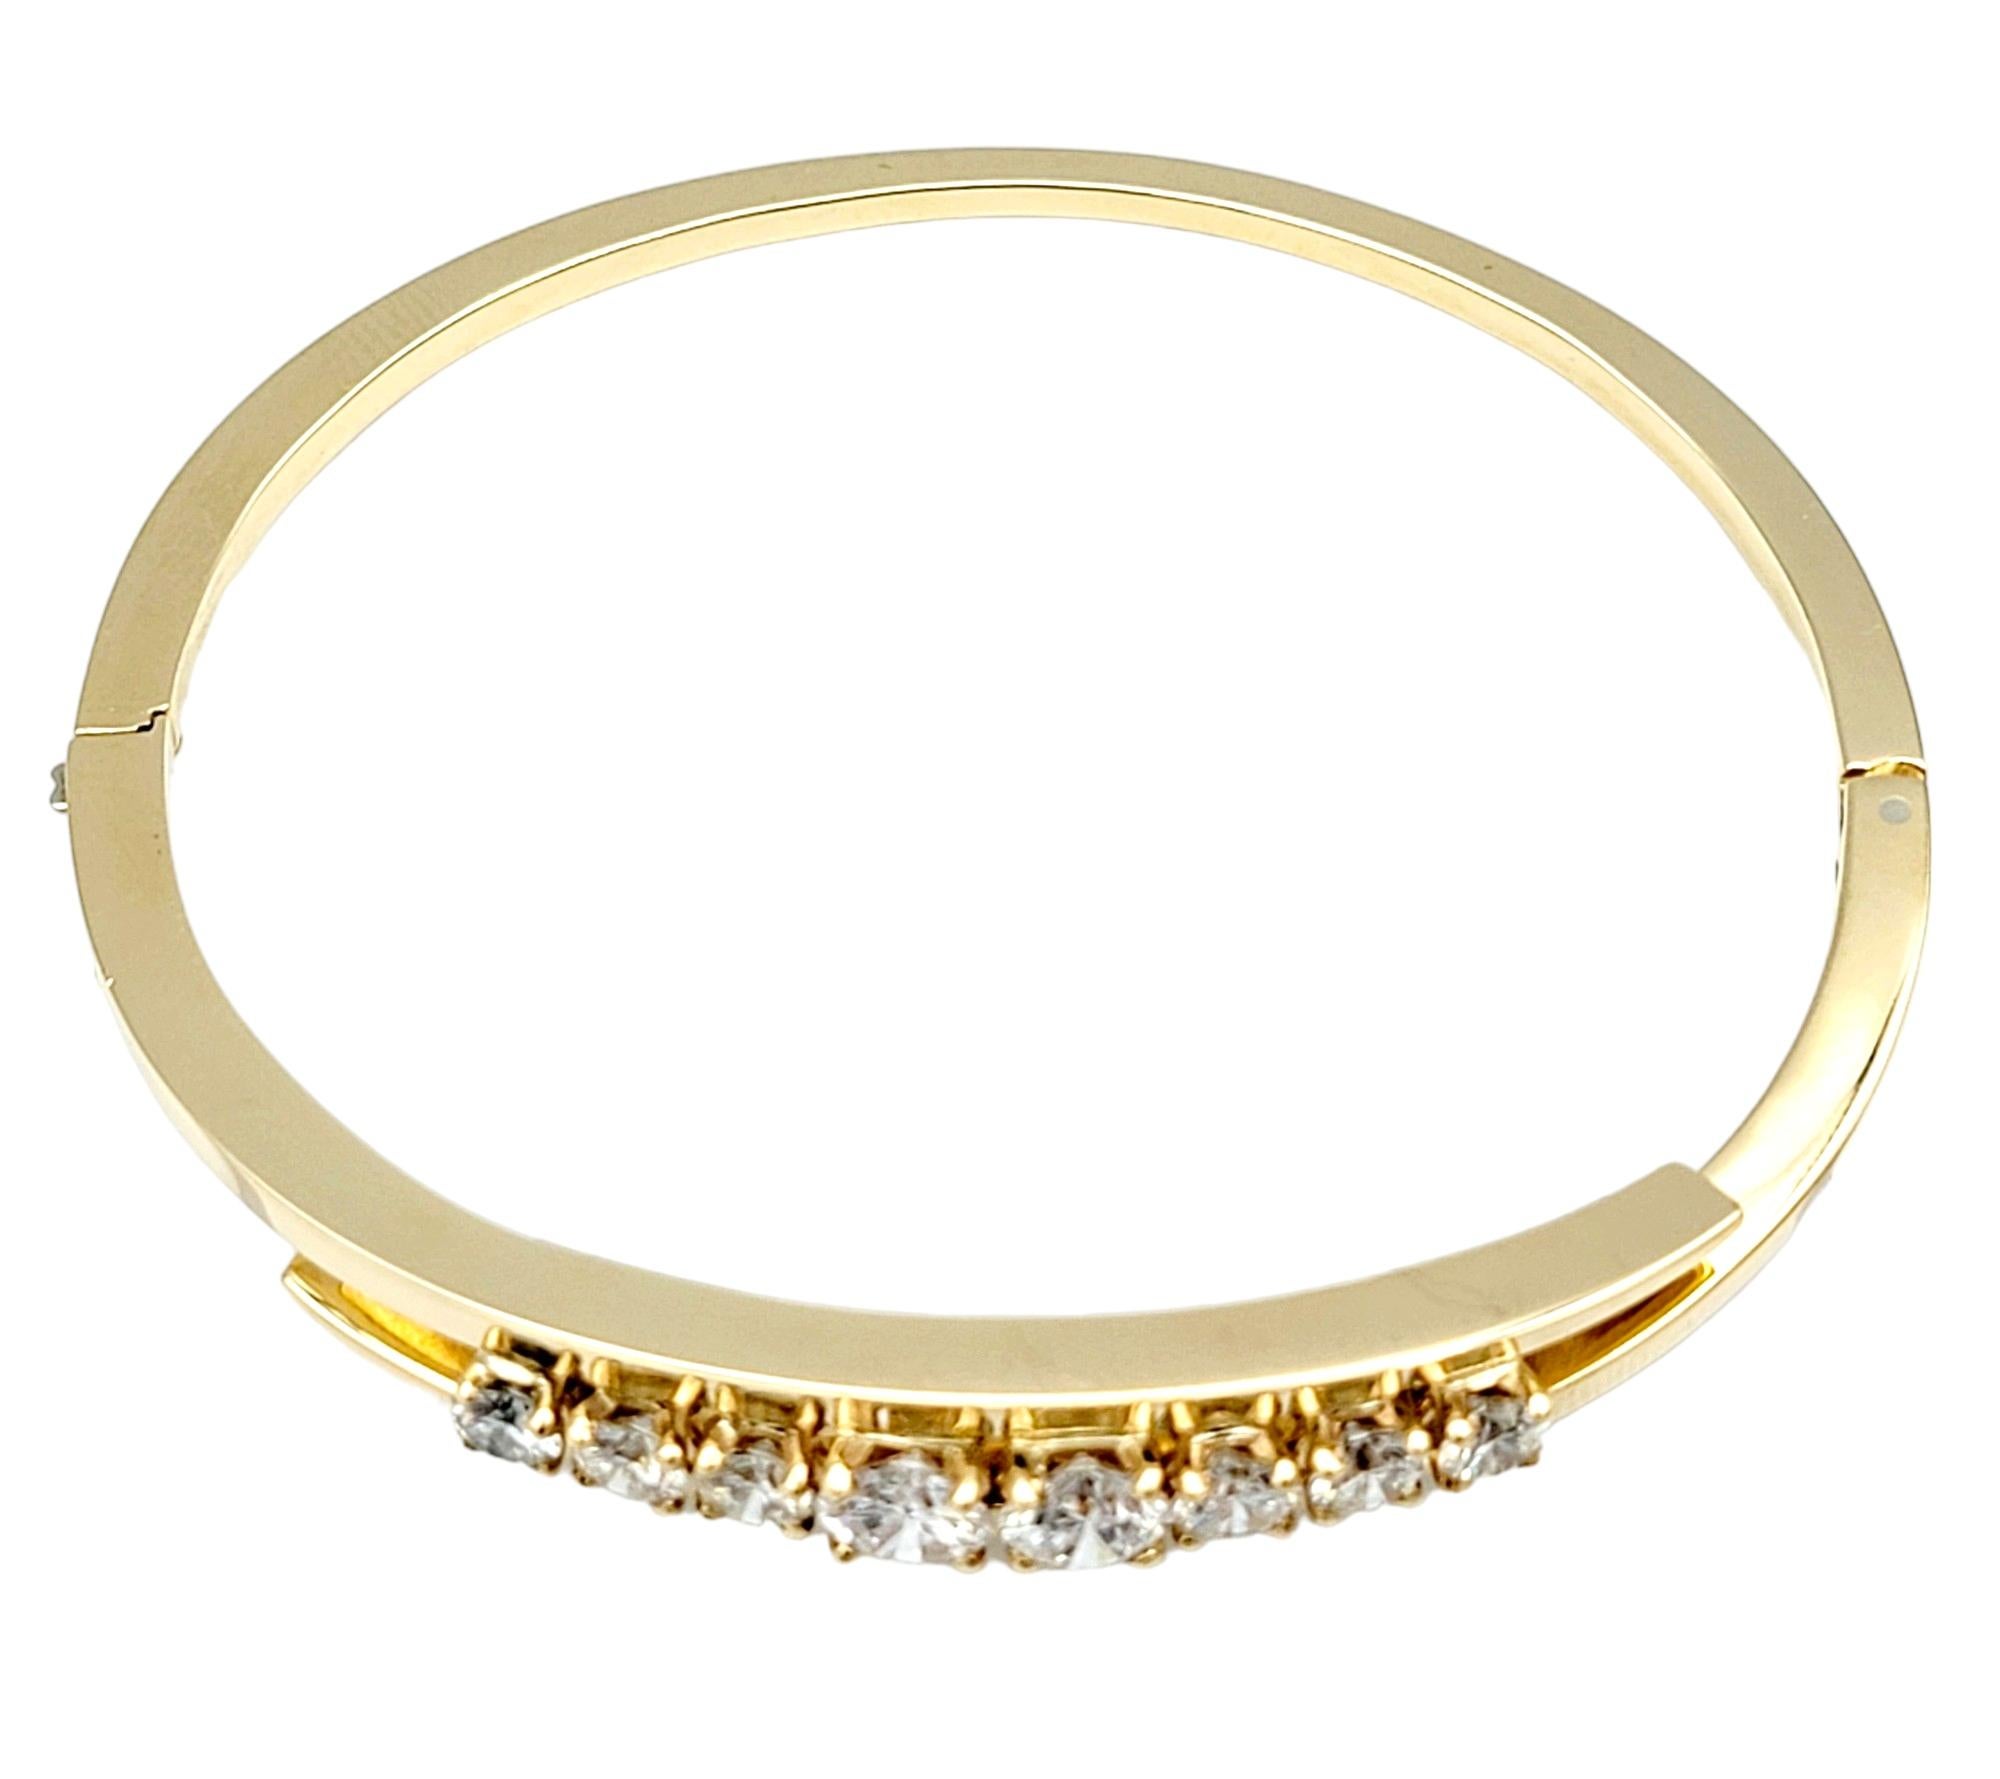 Round Cut Round Diamond Bypass Style Hinged Bangle Bracelet Set in 14 Karat Yellow Gold For Sale